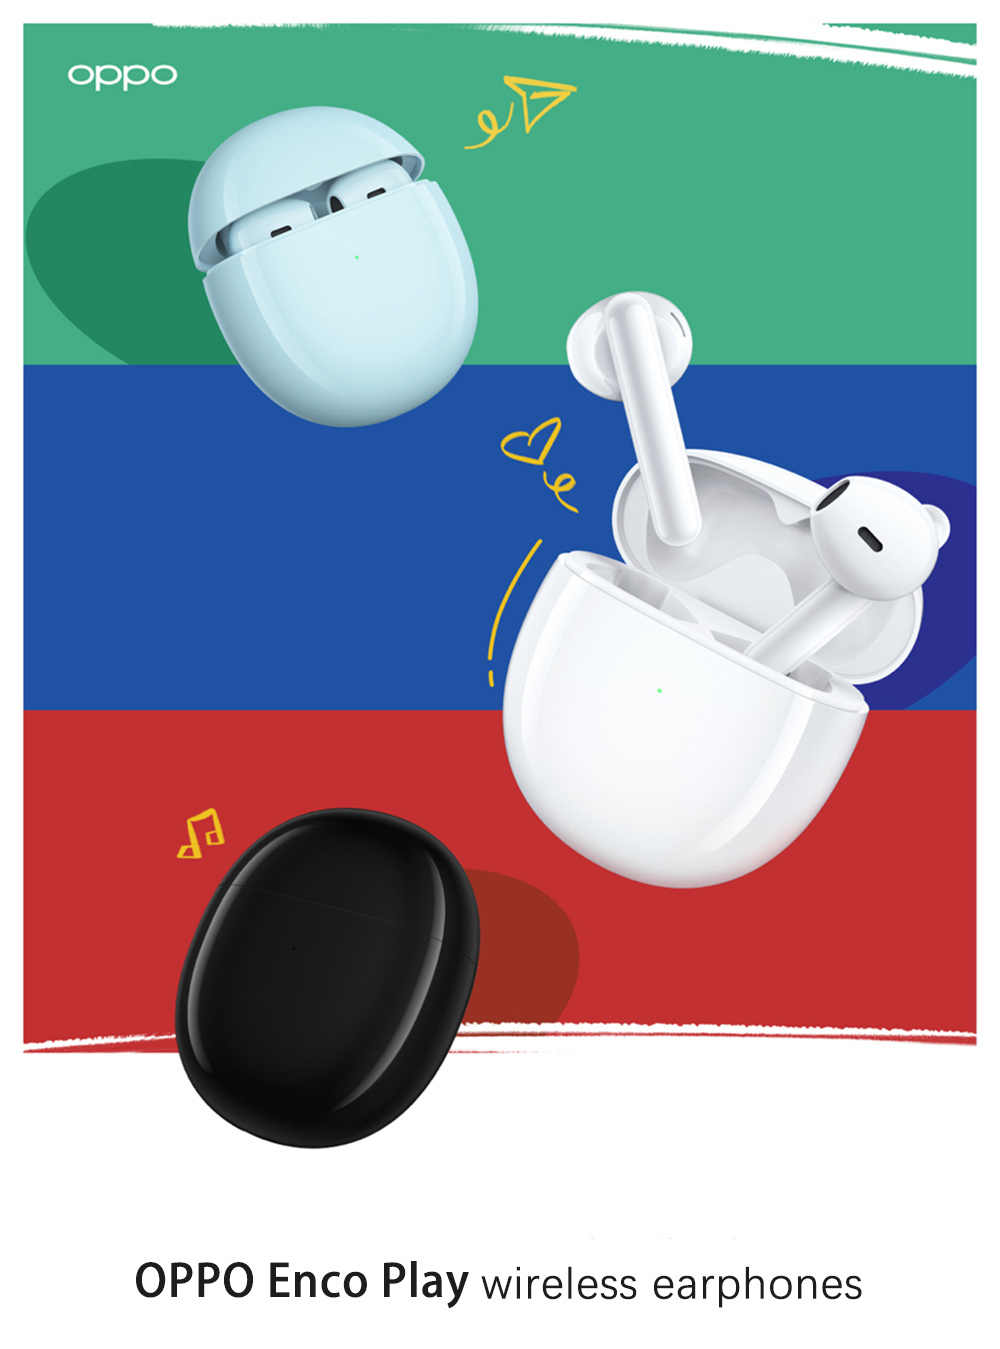 OPPO-Enco-Play-TWS-bluetooth-52-Earphone-12mm-Dynamic-Noise-Cancellation-Mic-AAC-SBC-Headset-Earbuds-1866456-1